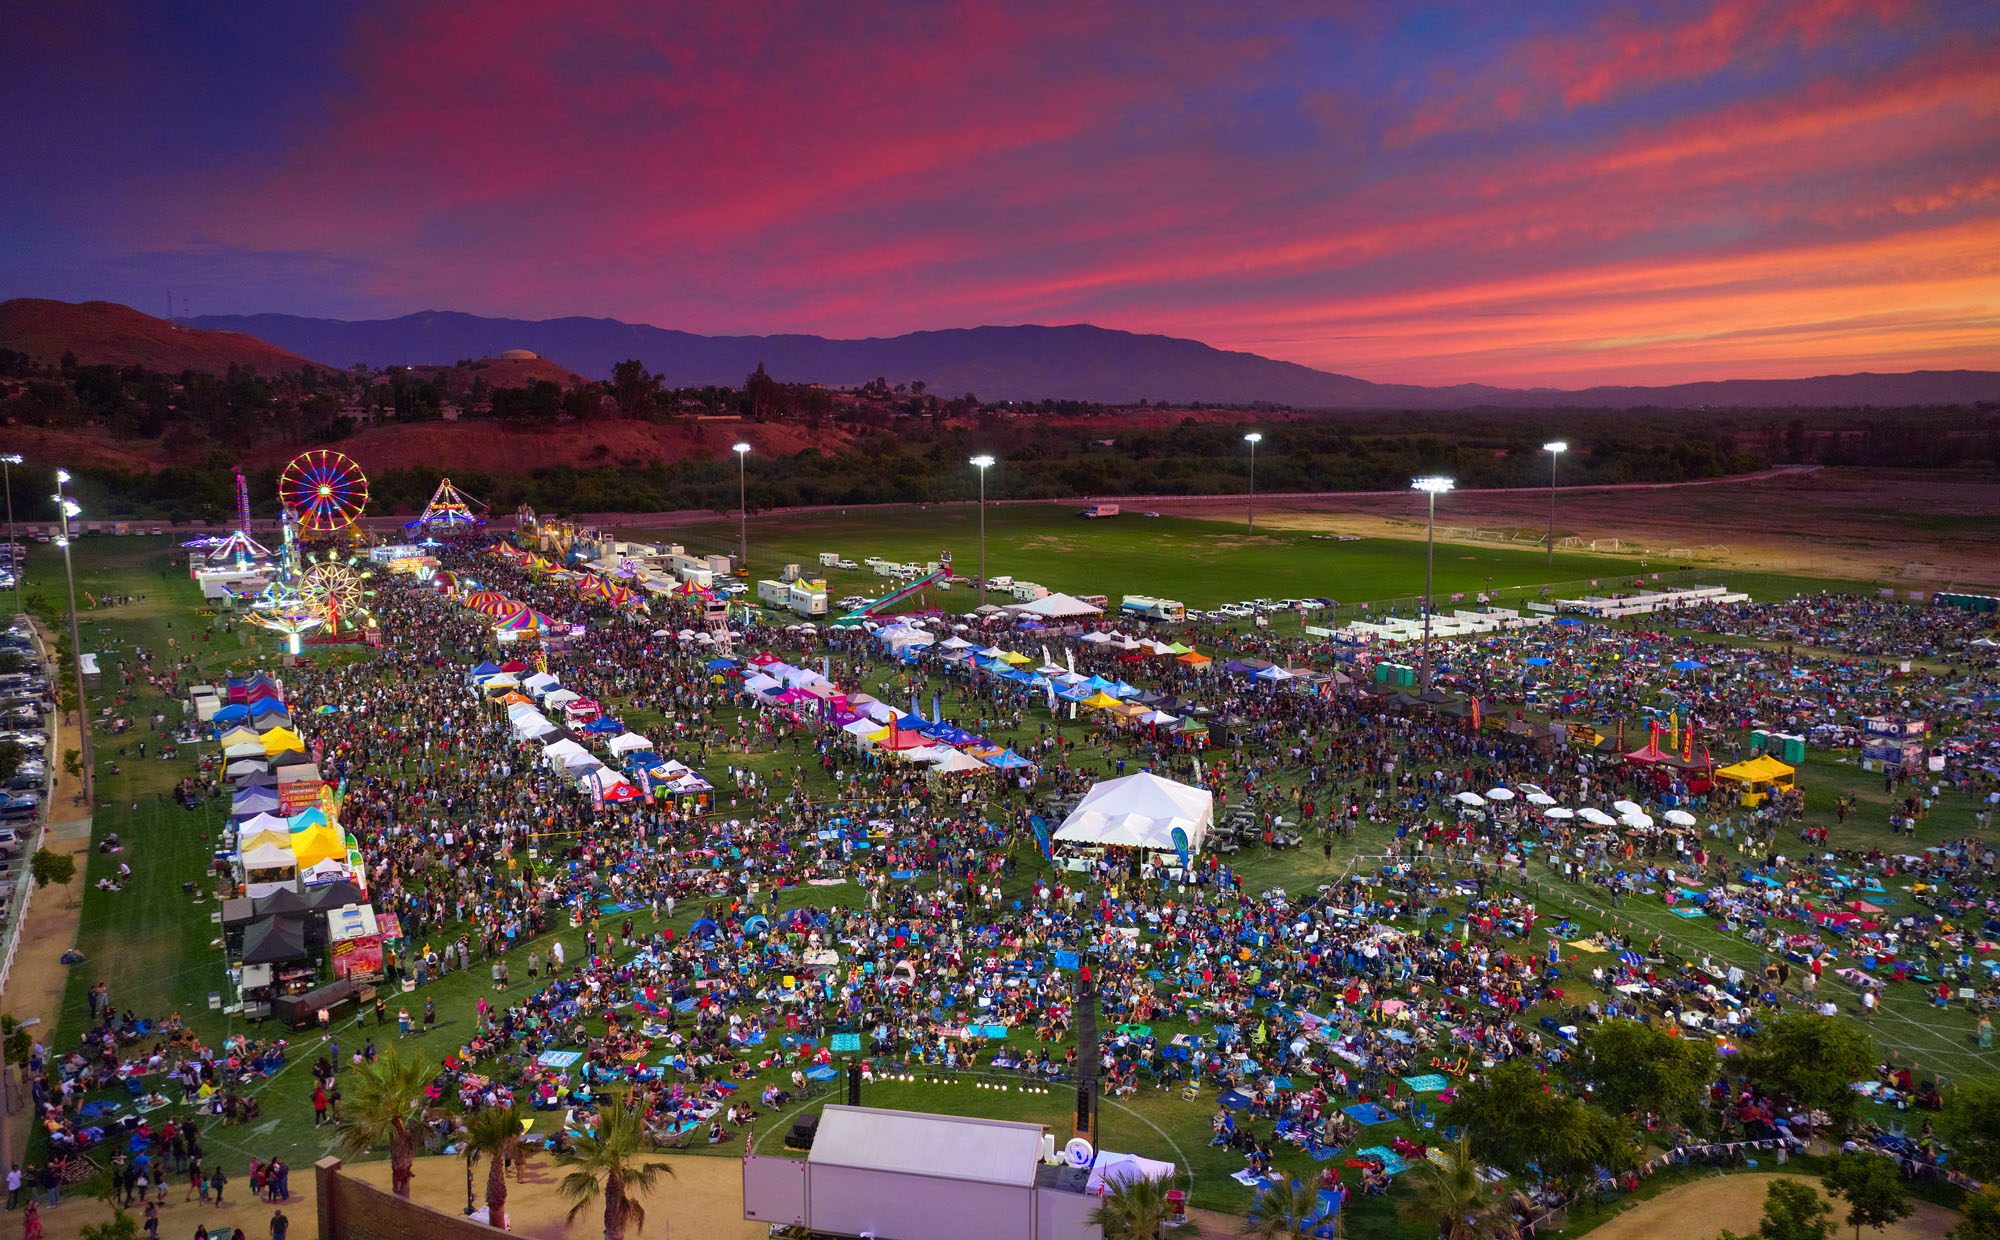 Sunset with colorful sky in an oblique aerial view of a fair with rides, vendors, and a stage